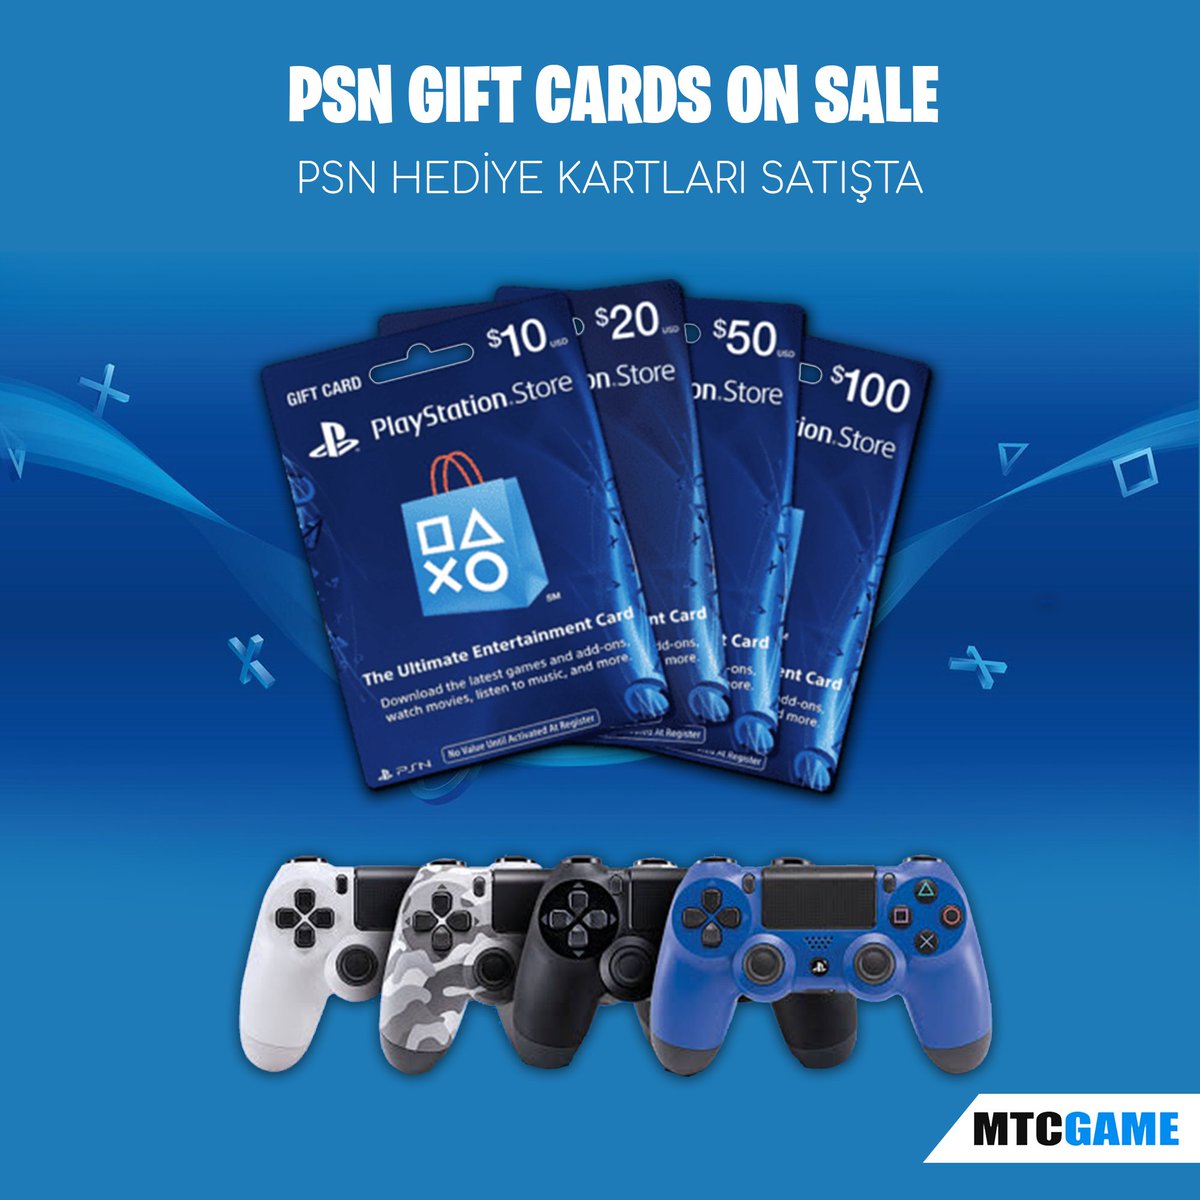 Psngiftcards Hashtag On Twitter